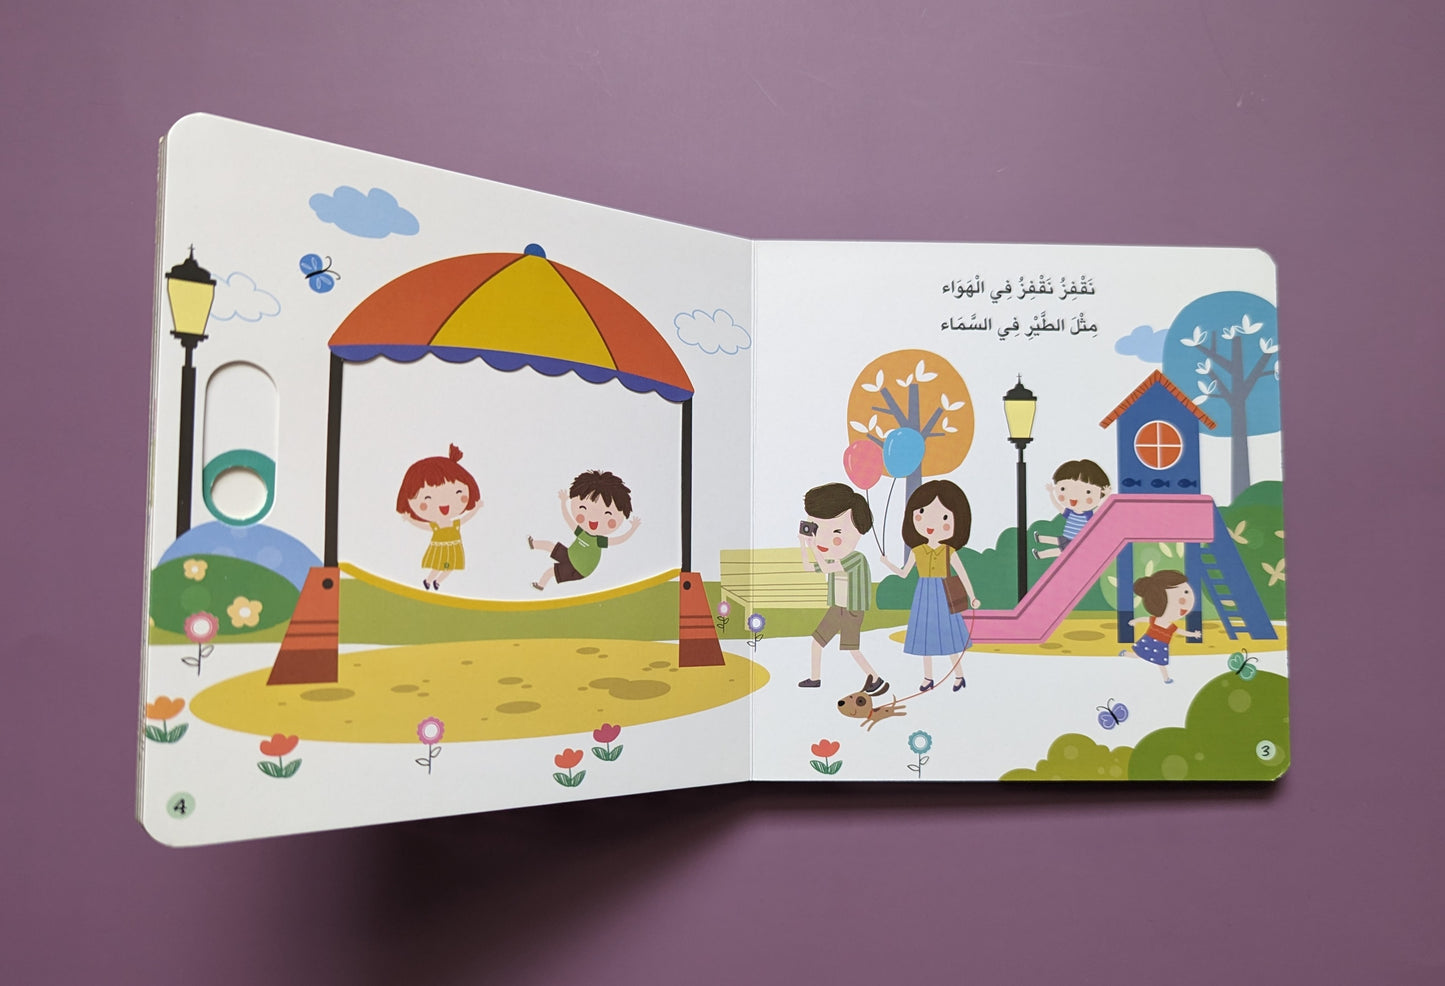 A Day at the Park - يوم في الحديقة